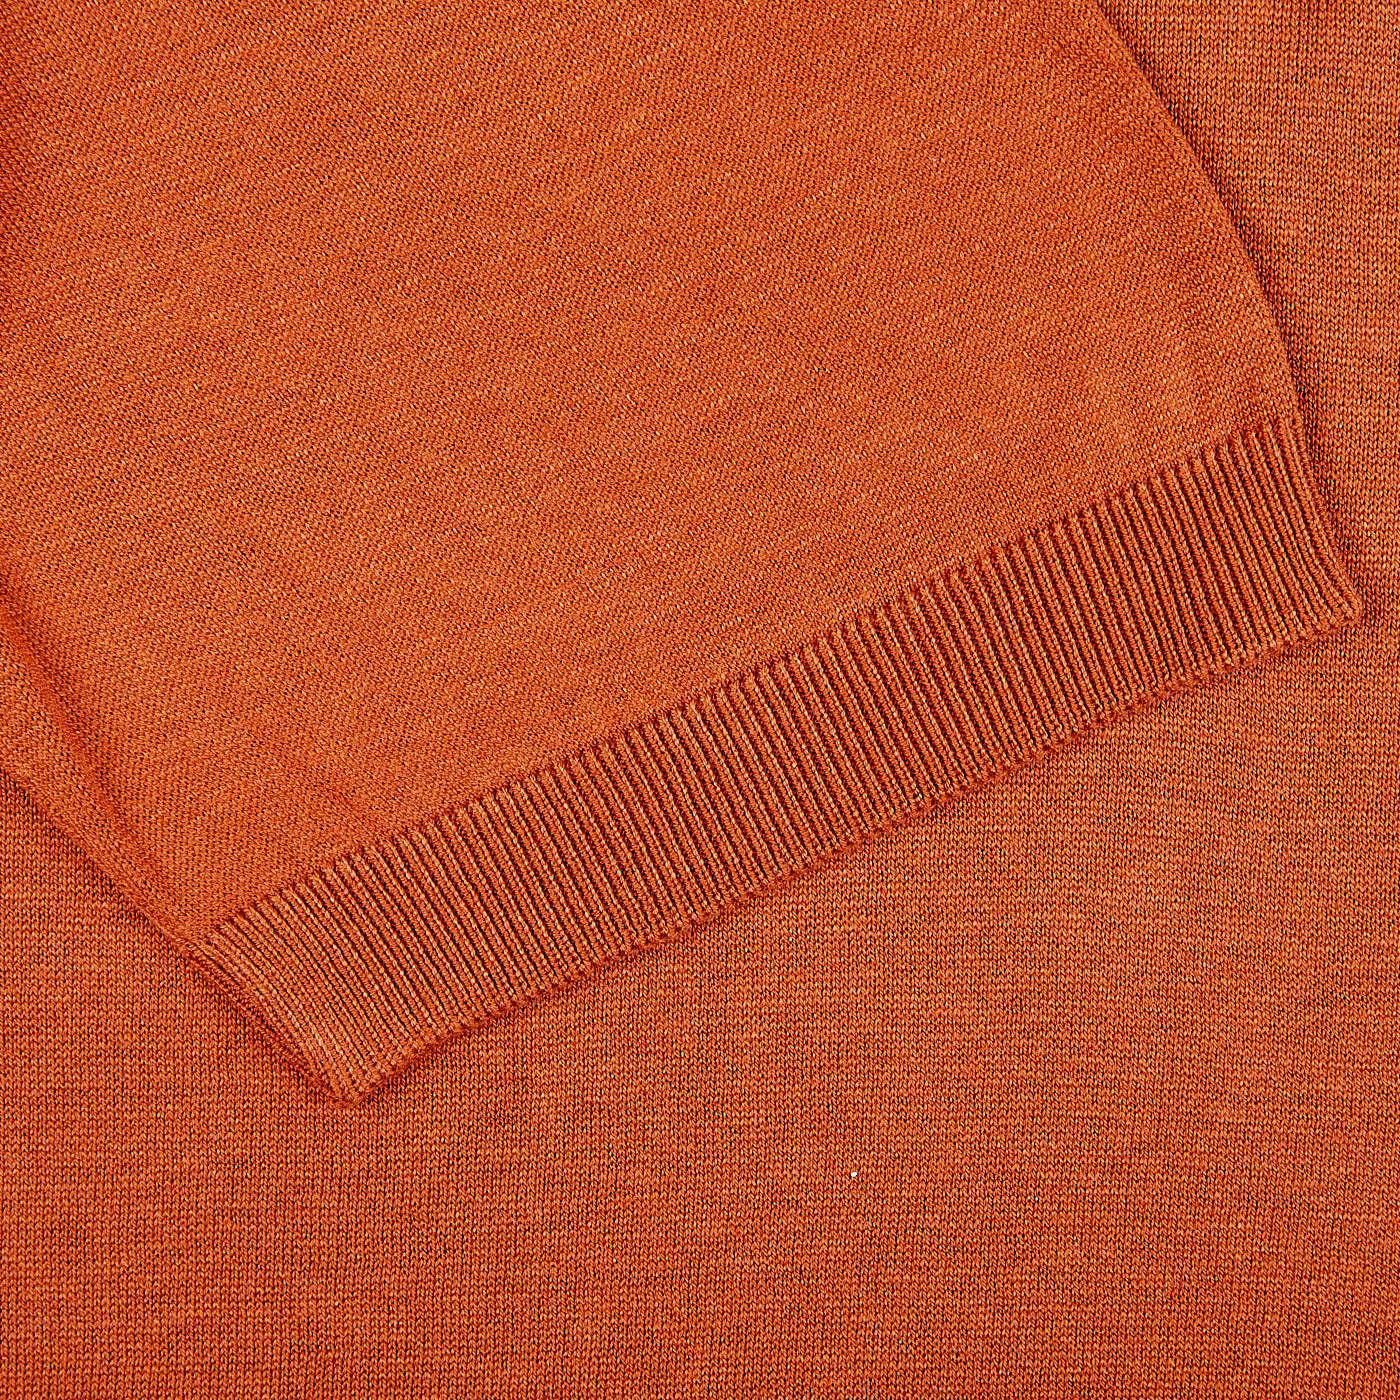 A close up of a Gran Sasso Rust Orange Knitted Silk Polo Shirt.